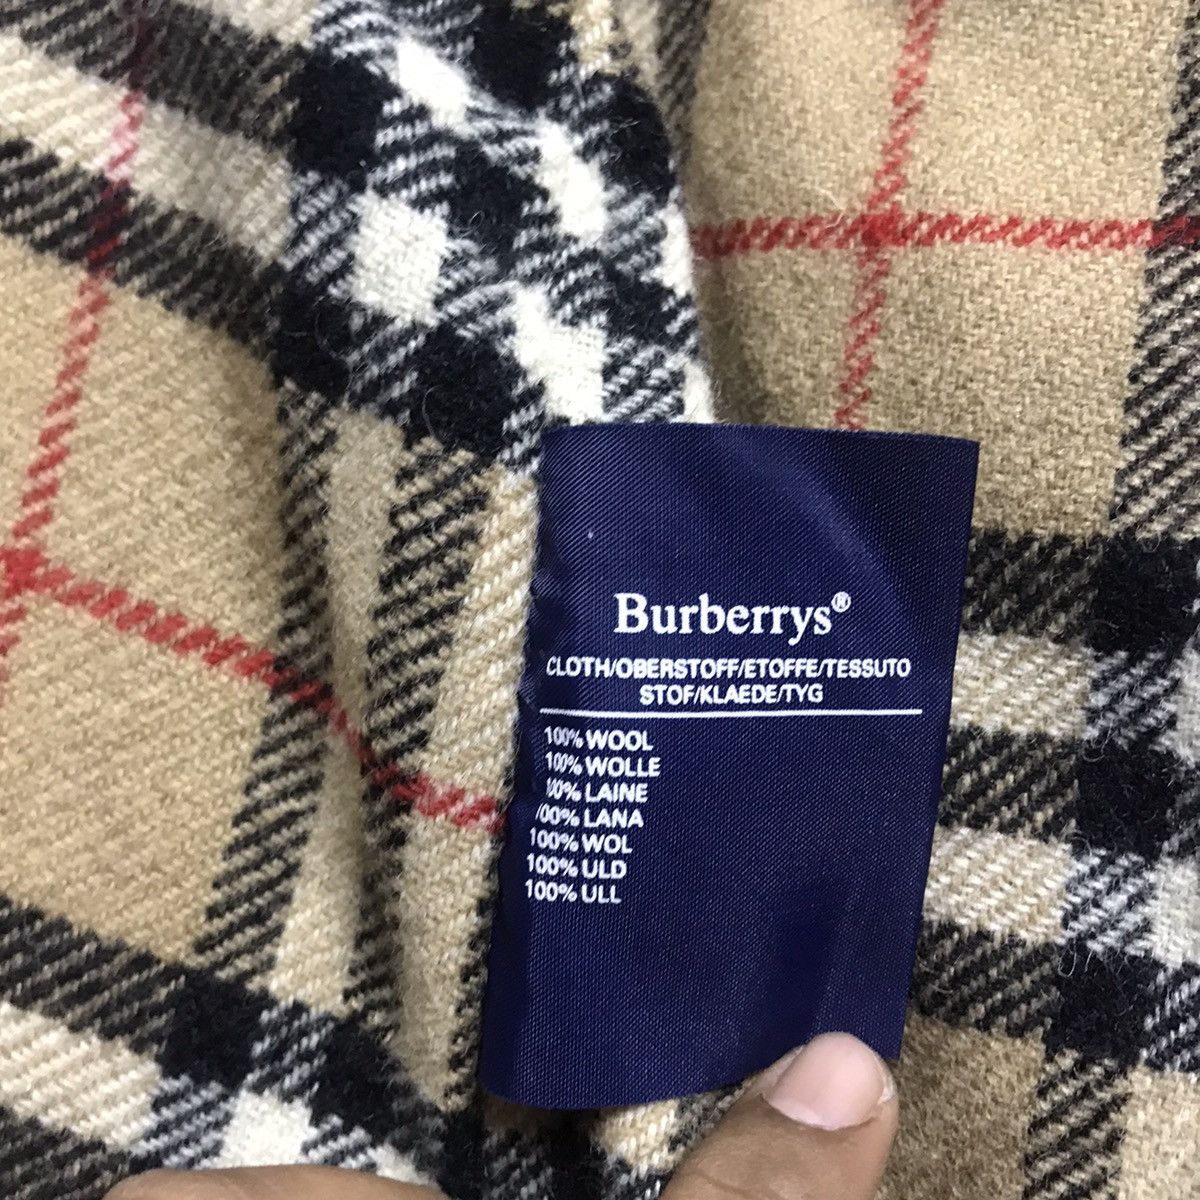 Burberry Prorsum Vintage burberry nova check trench coat with wool lining Size US L / EU 52-54 / 3 - 6 Thumbnail